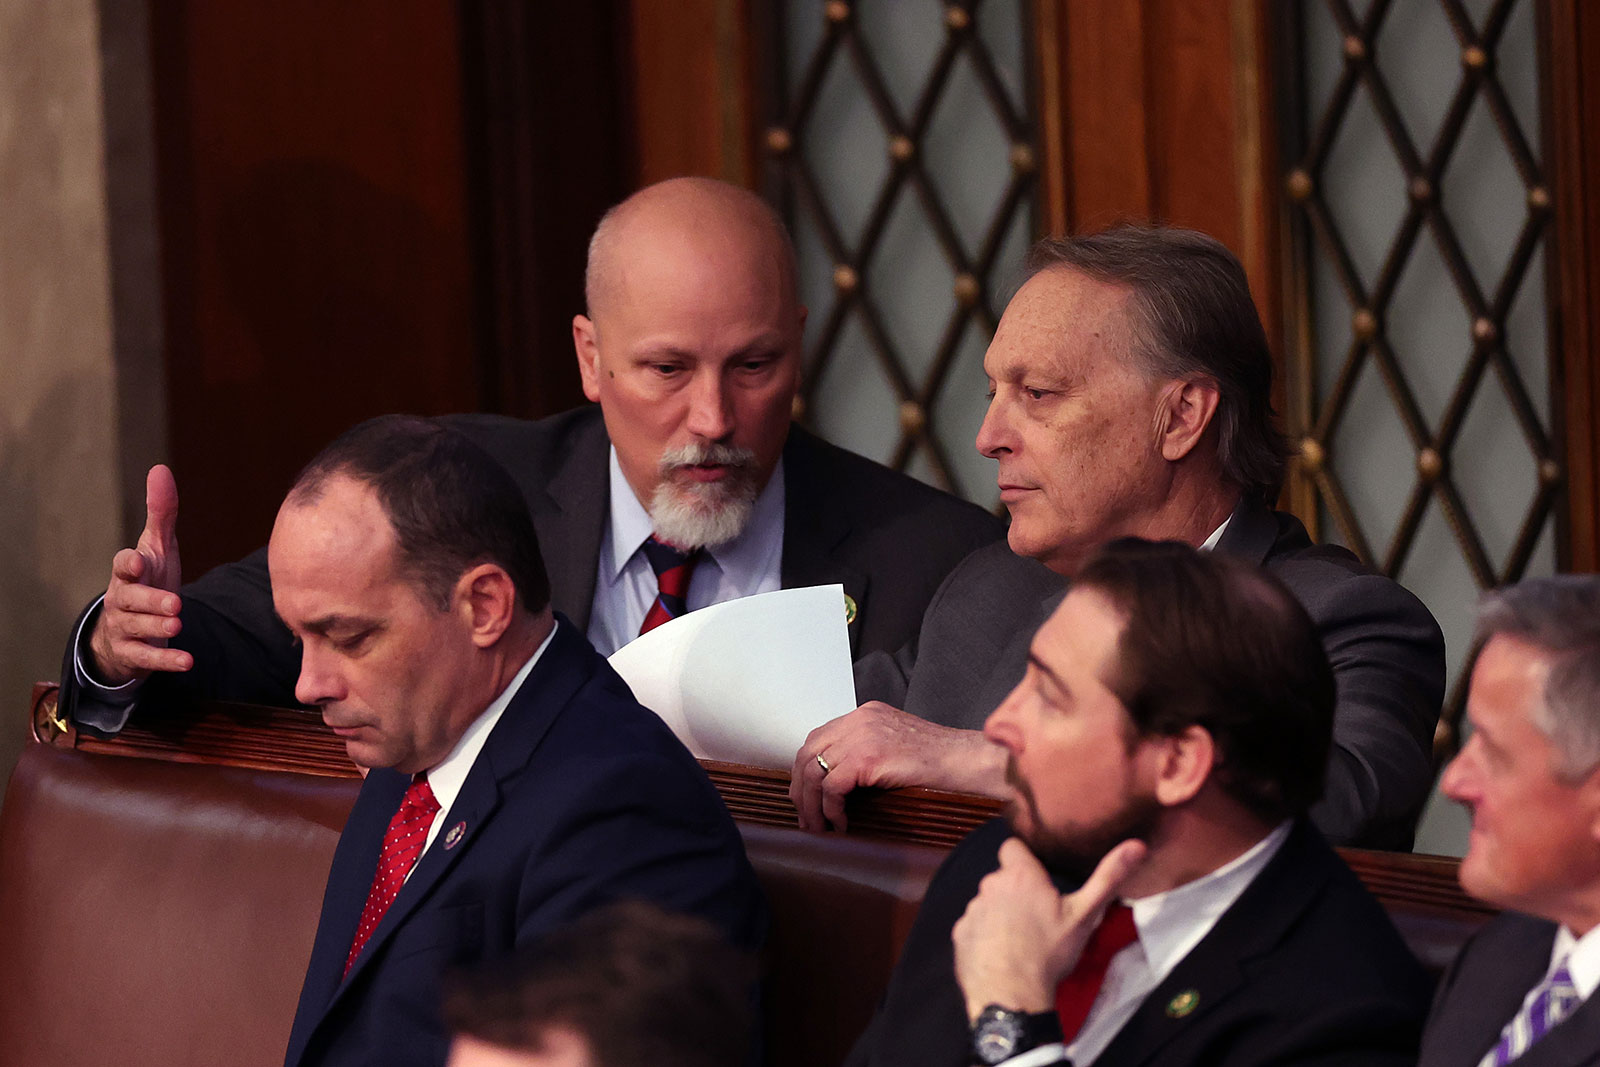 Rep. Chip Roy, second left, talks to Rep. Andy Biggs during the fourth day of elections for Speaker of the House on January 6, 2023.